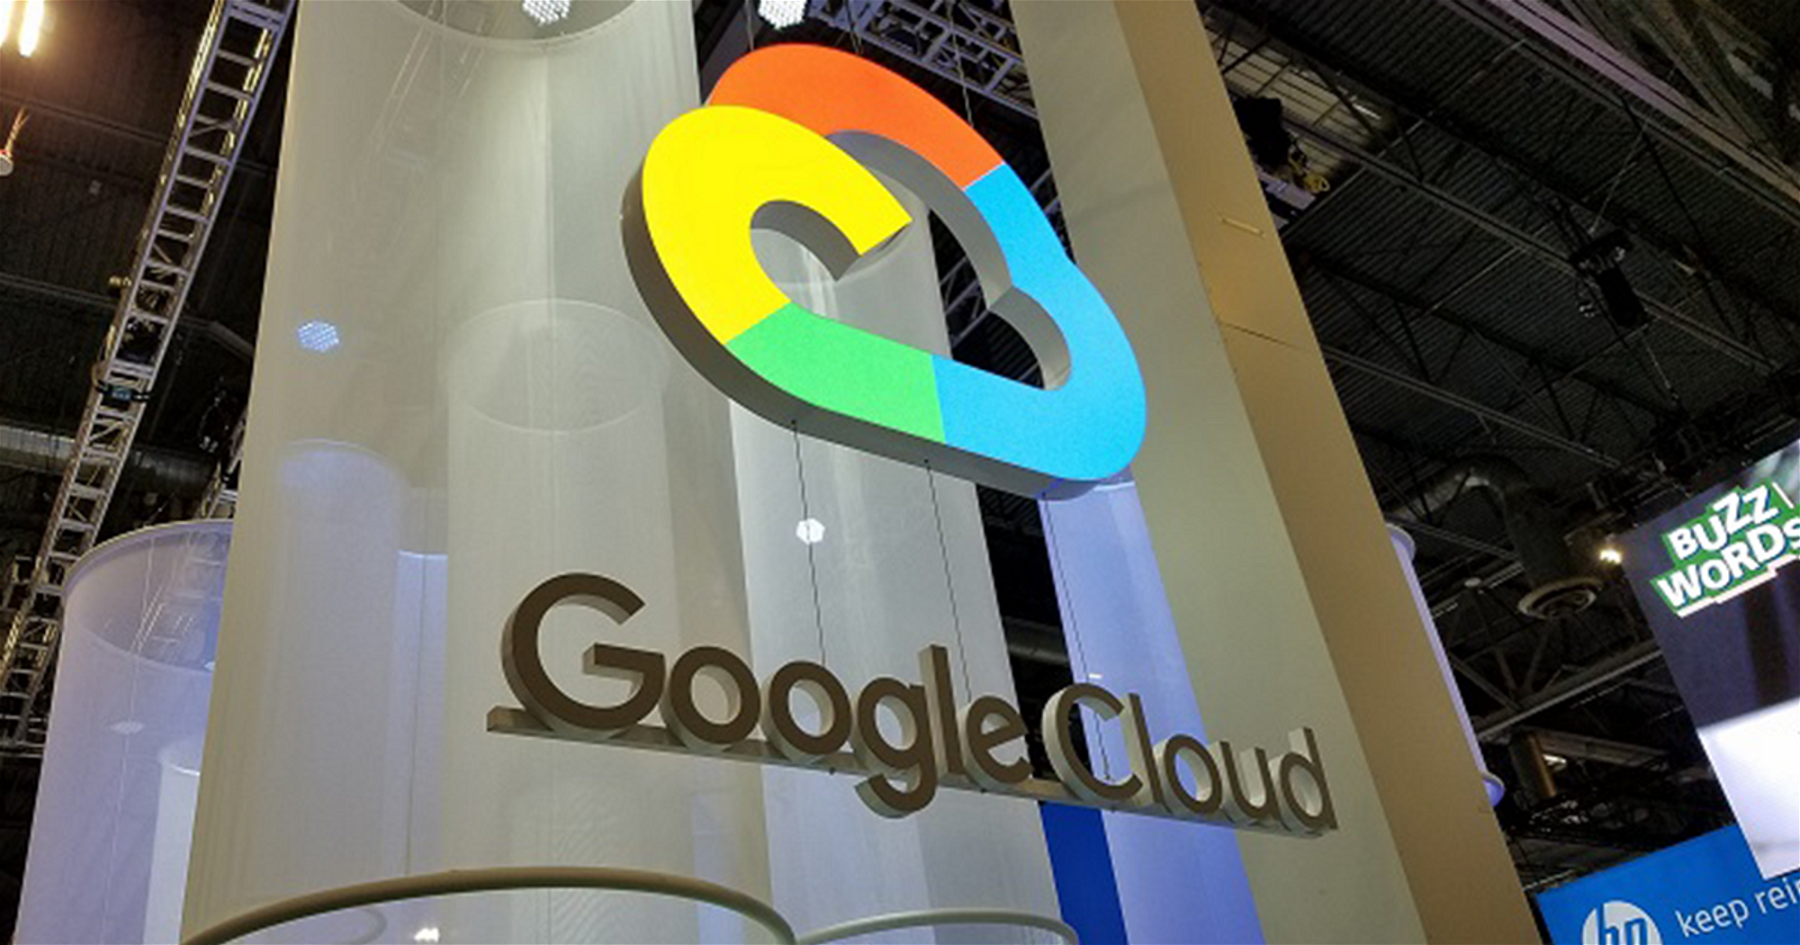 Blue Shield of California teams with Google Cloud for billing, payment AI